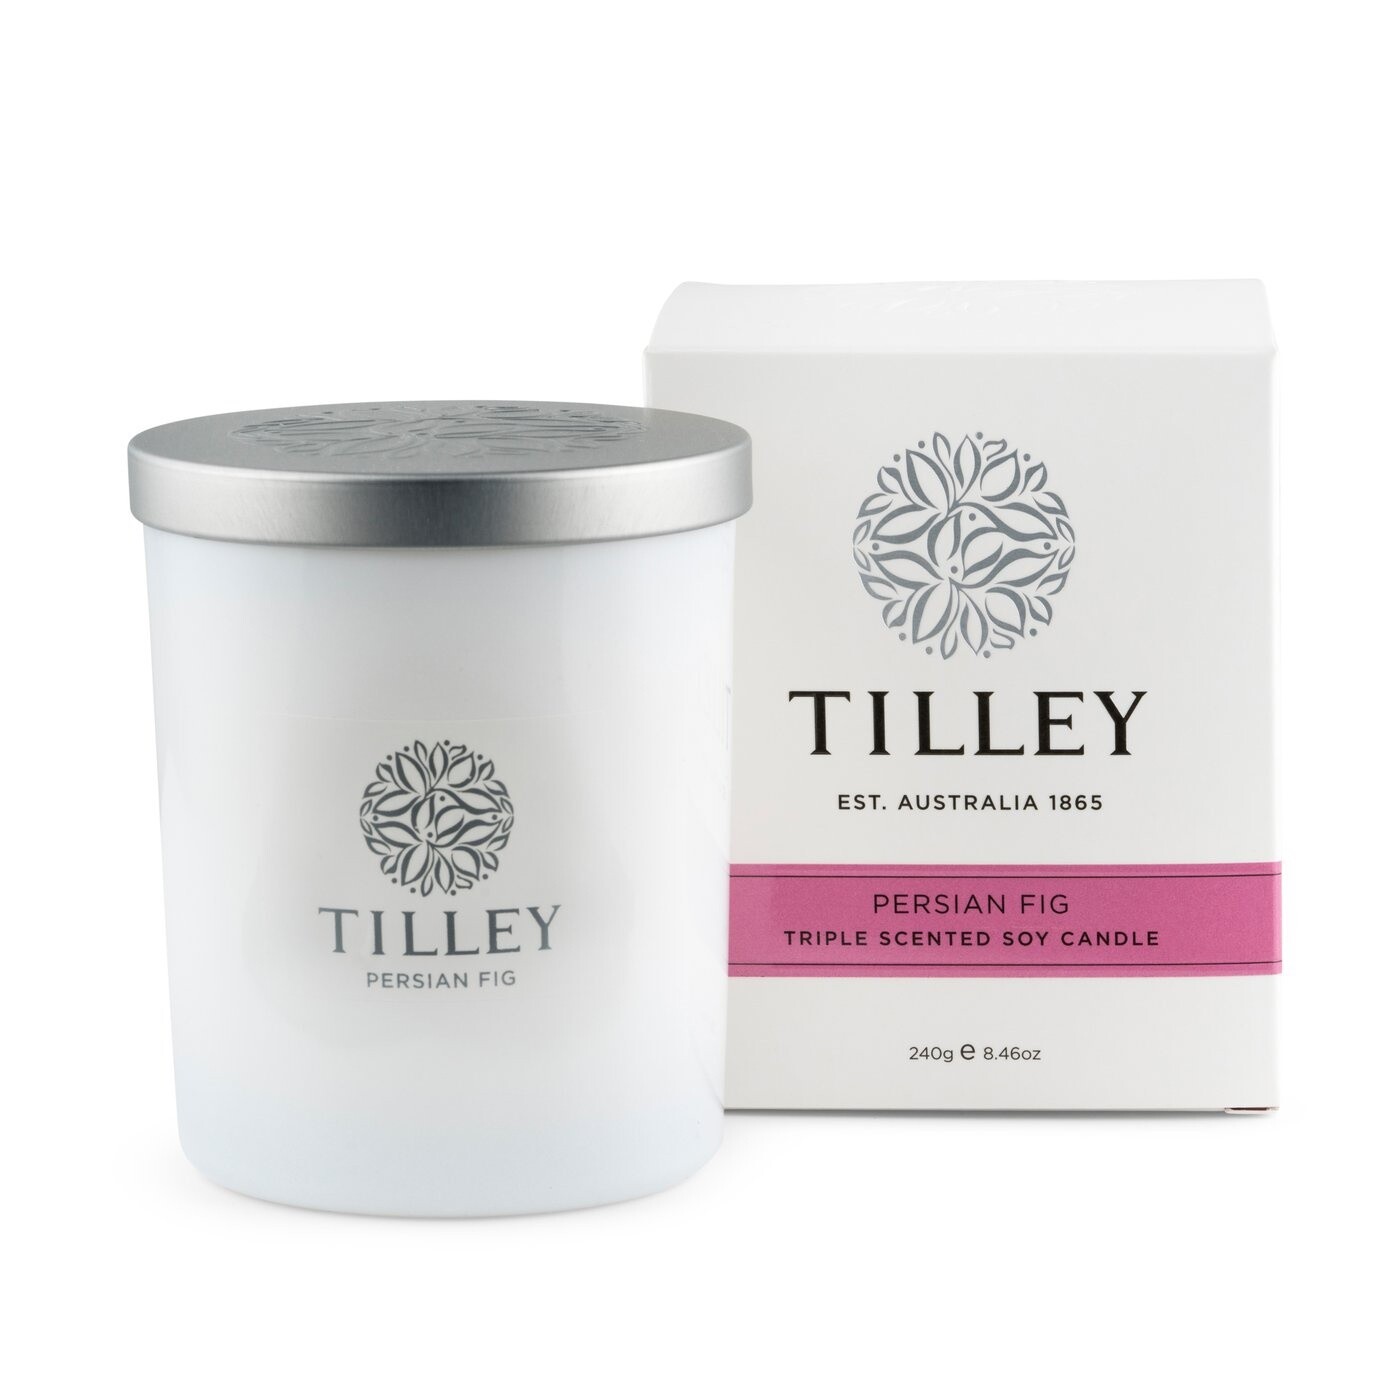 Tilley Soy Candle Persian Fig